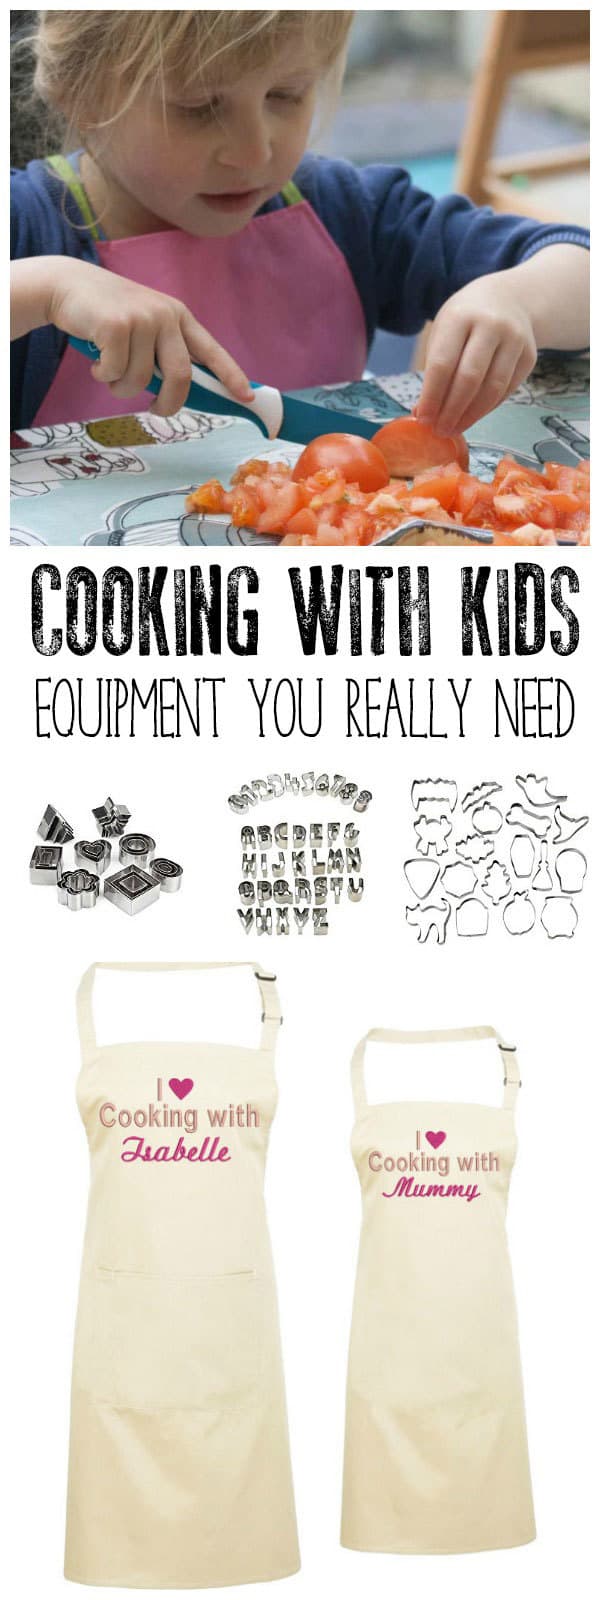 With so many gadgets and gizmos around what equipment is actually needed for cooking with kids. Find our essentials, they are nice and some little ideas that make time in the kitchen with kids a little bit easier for all.